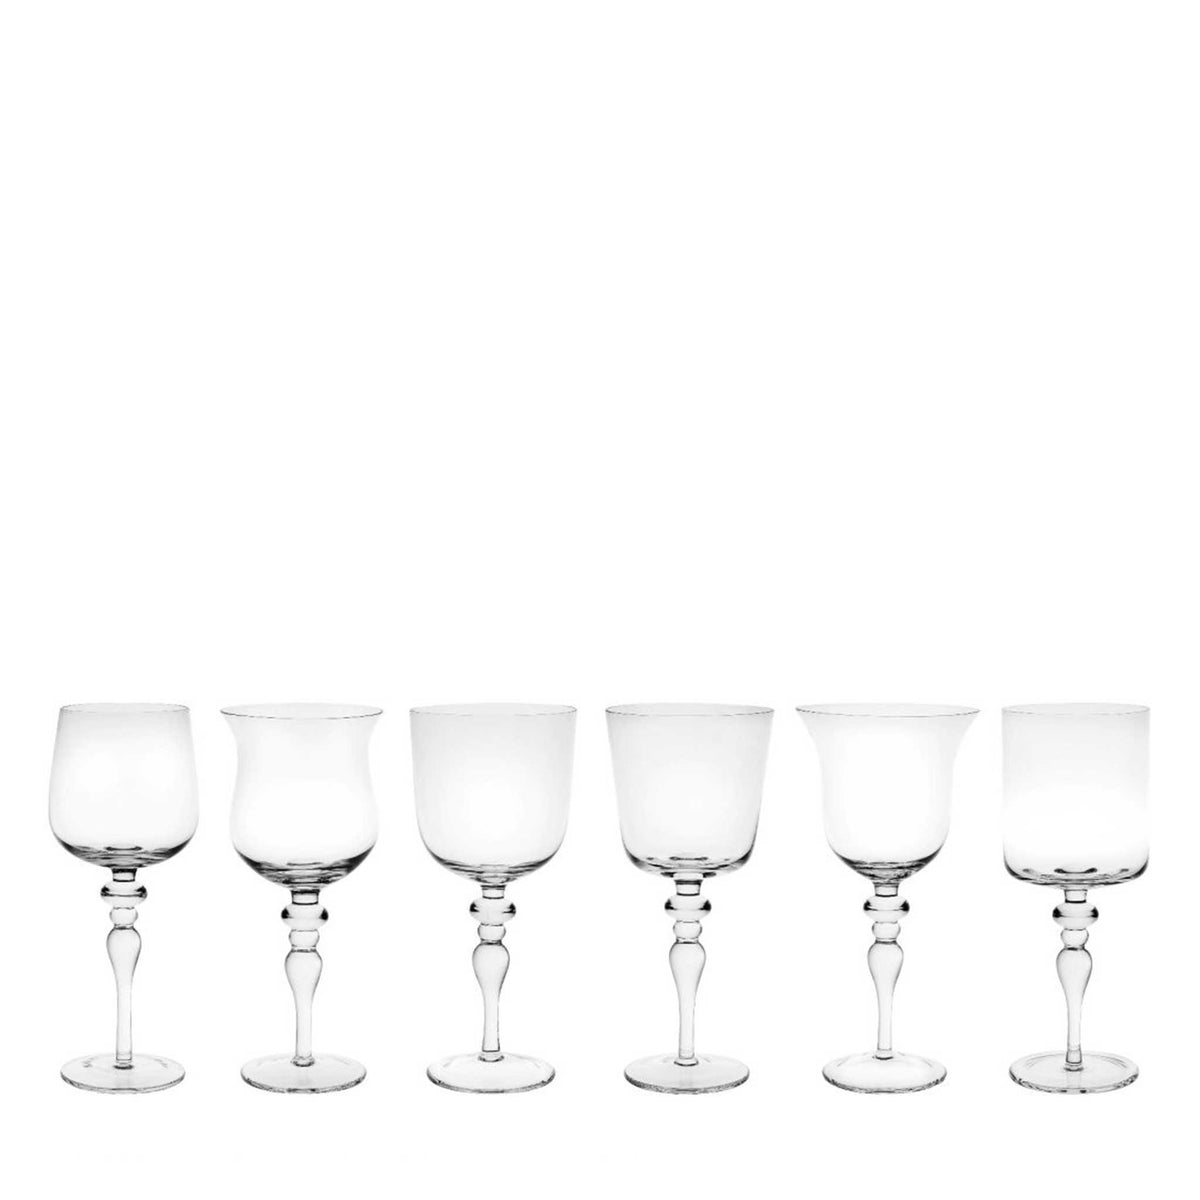 Bitossi Home Set of 6 Glasses Assorted Shapes Texture Nuances Amber Pink -  White Wine - Issimo